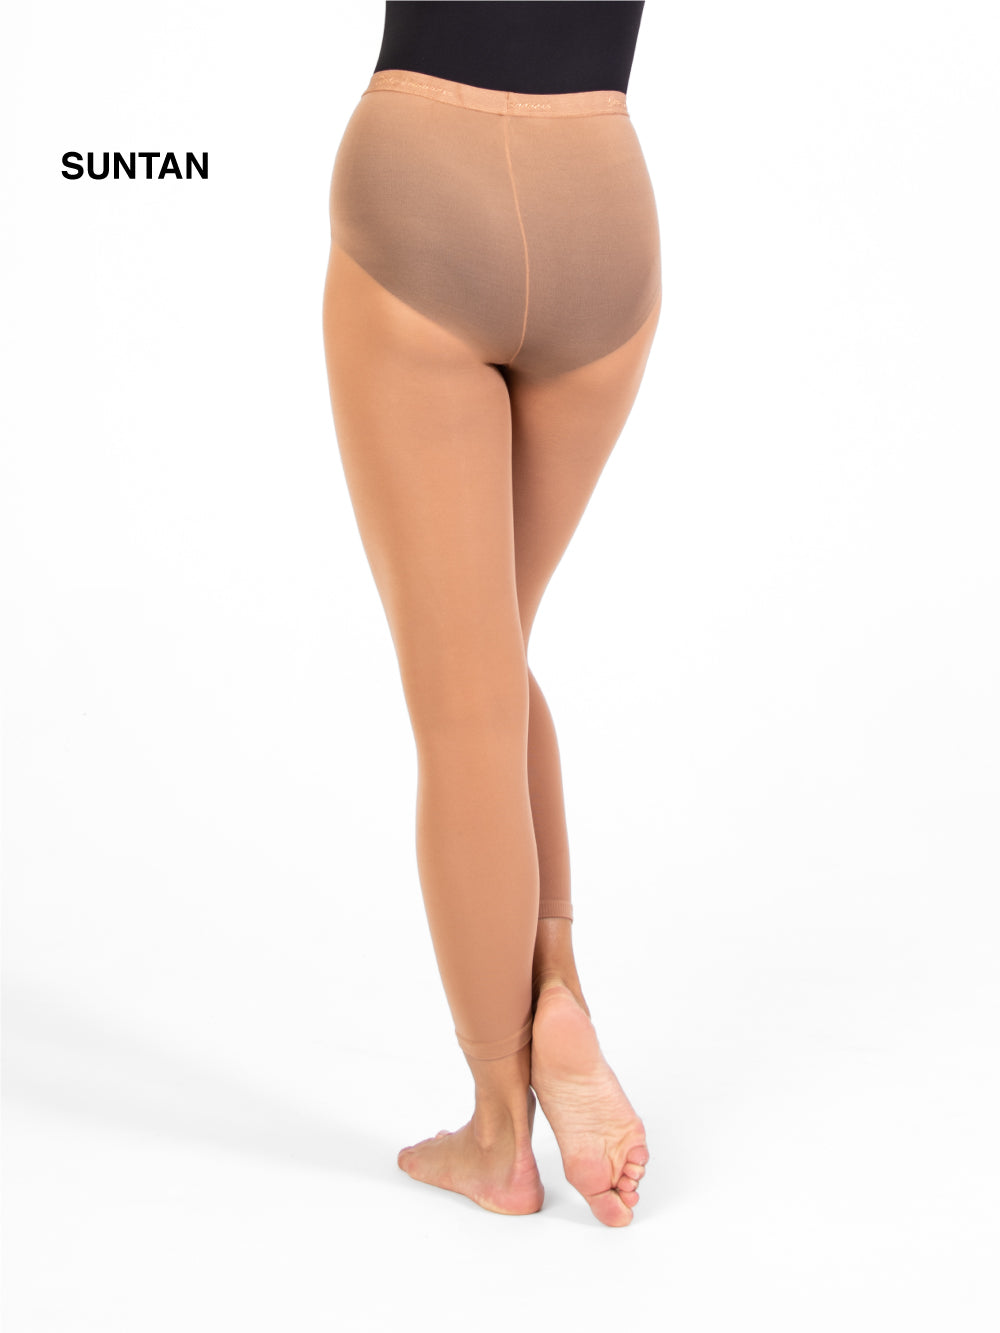 TotalSTRETCH Seamless Footless Tights – Body Wrappers